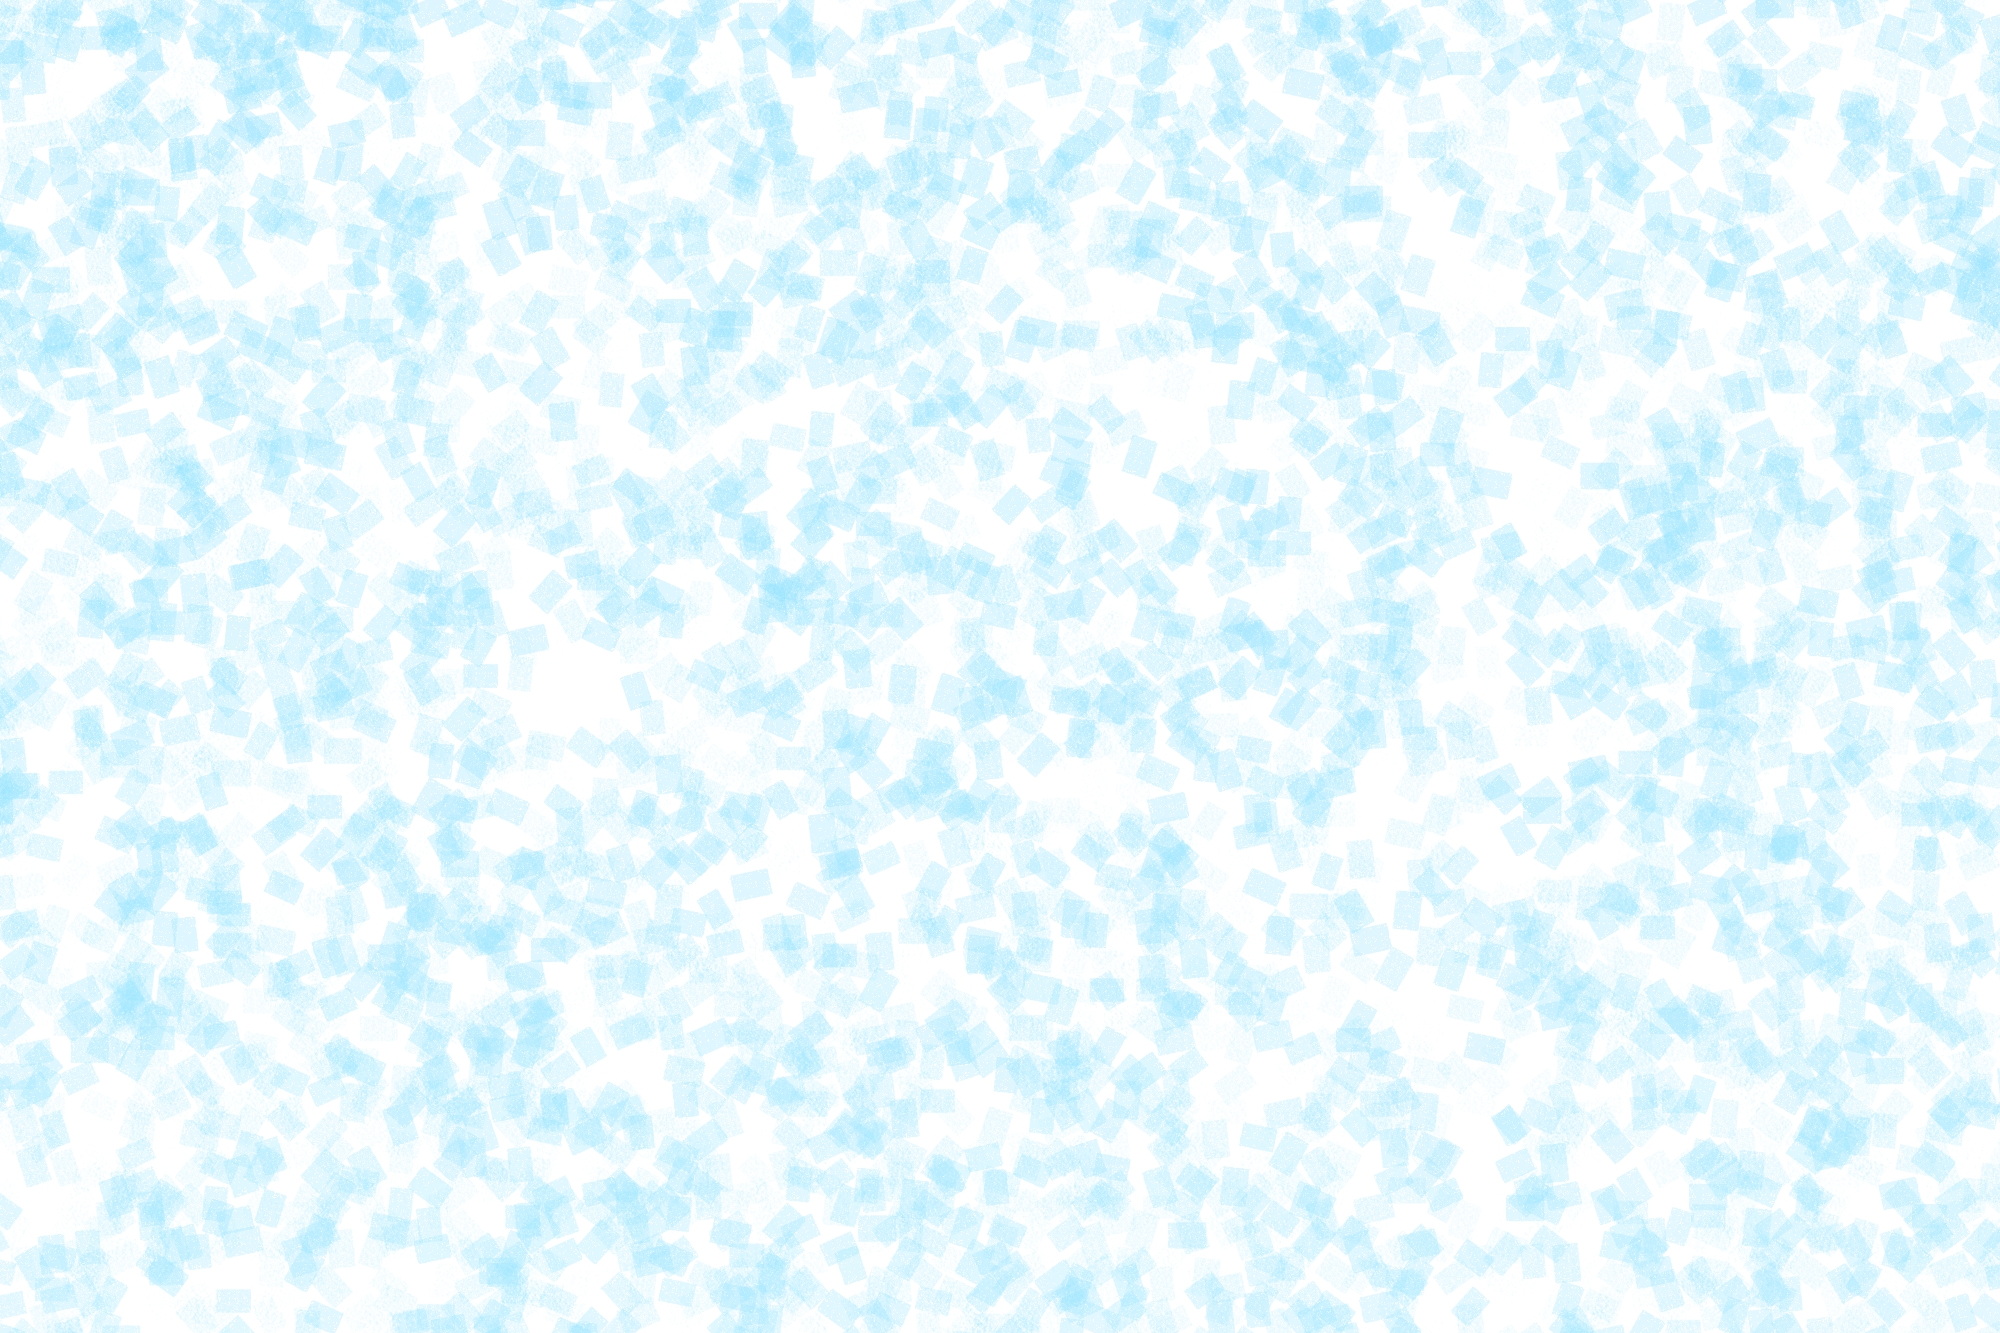 Background_composed_of_blue_rectangles